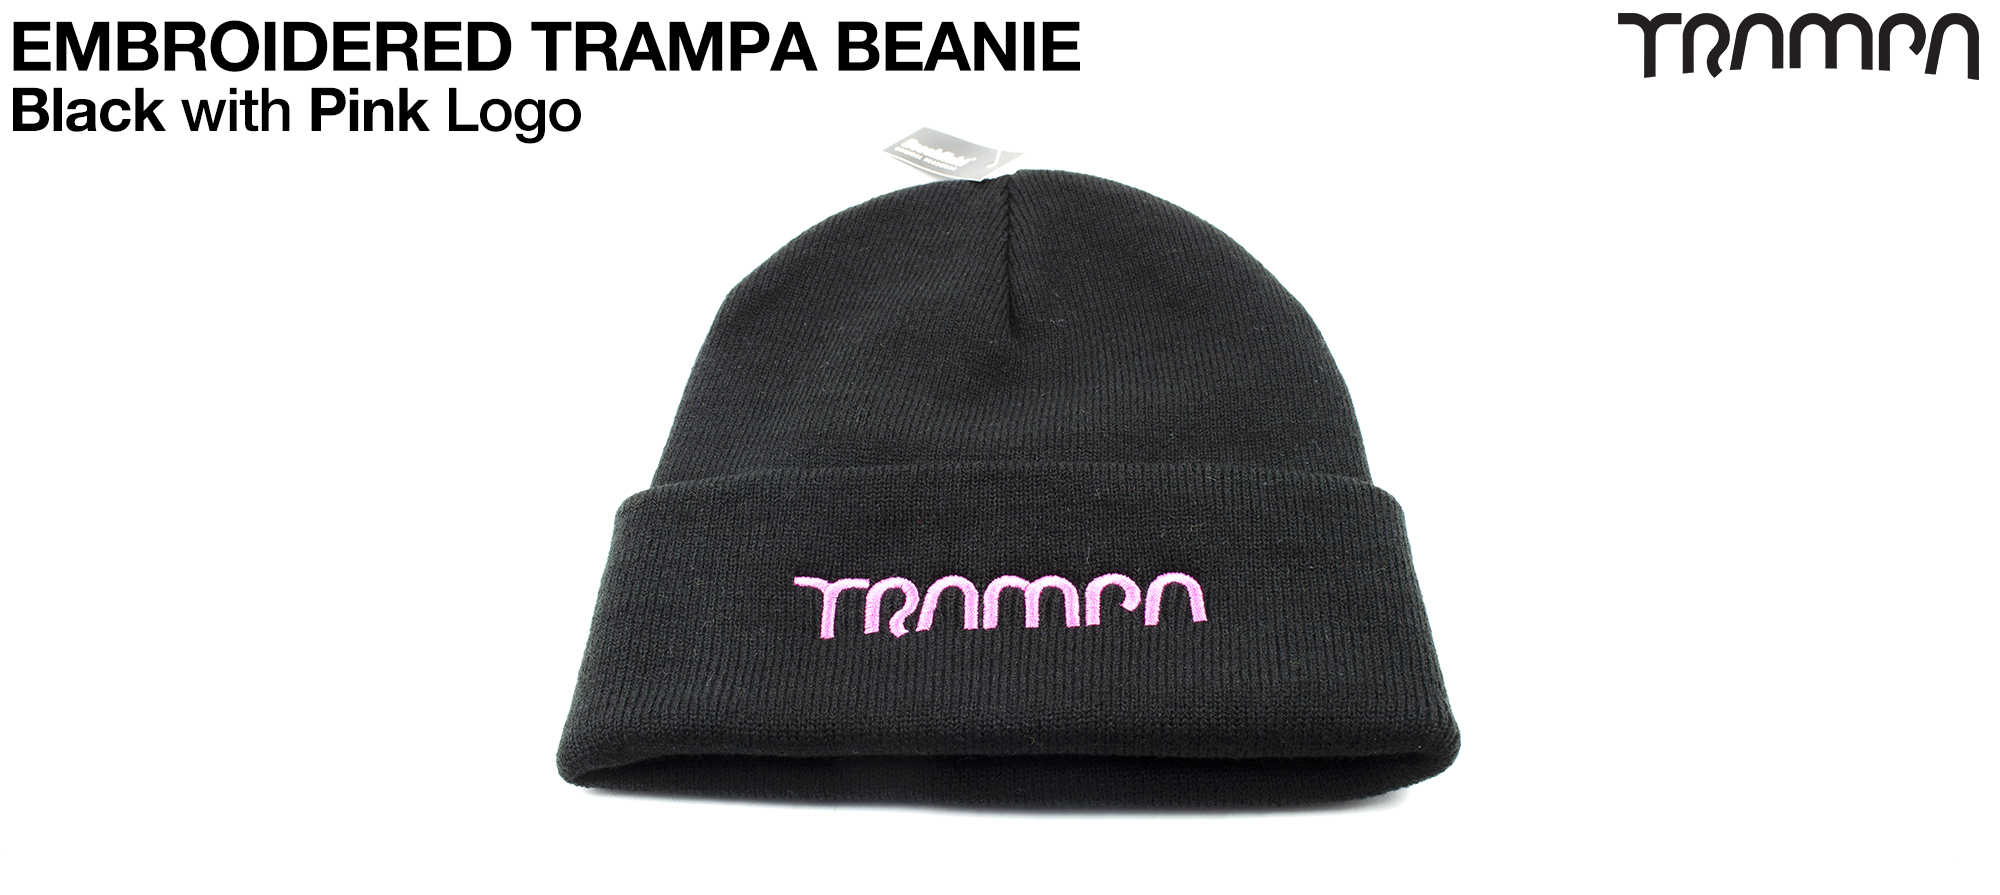 BLACK Beanie with PINK TRAMPA logo  - Double thick turn over for extra warmth 